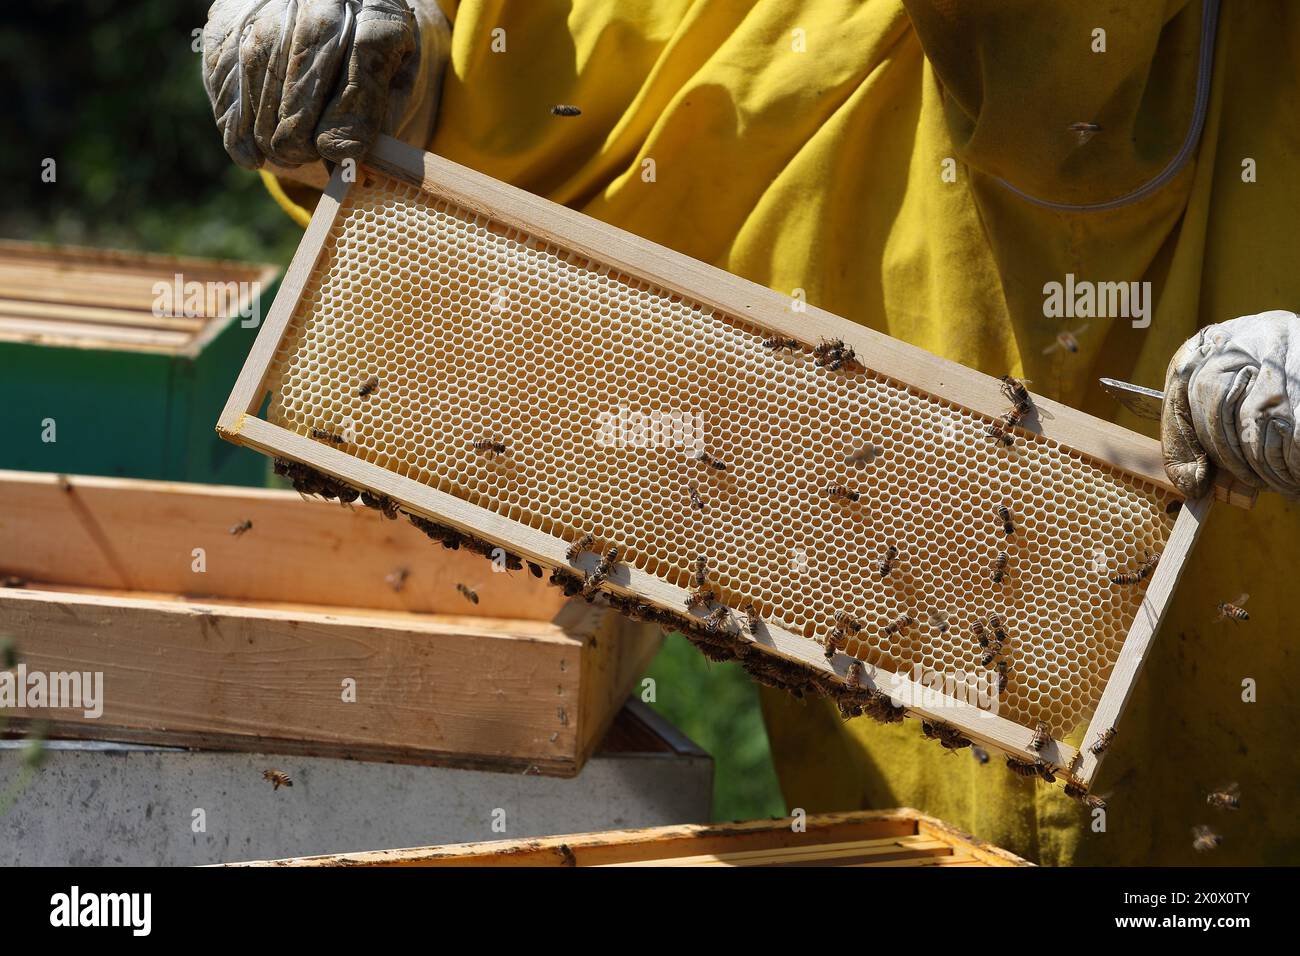 Beekeeping - The beekeeper with the honeycomb full of honey and bees Stock Photo